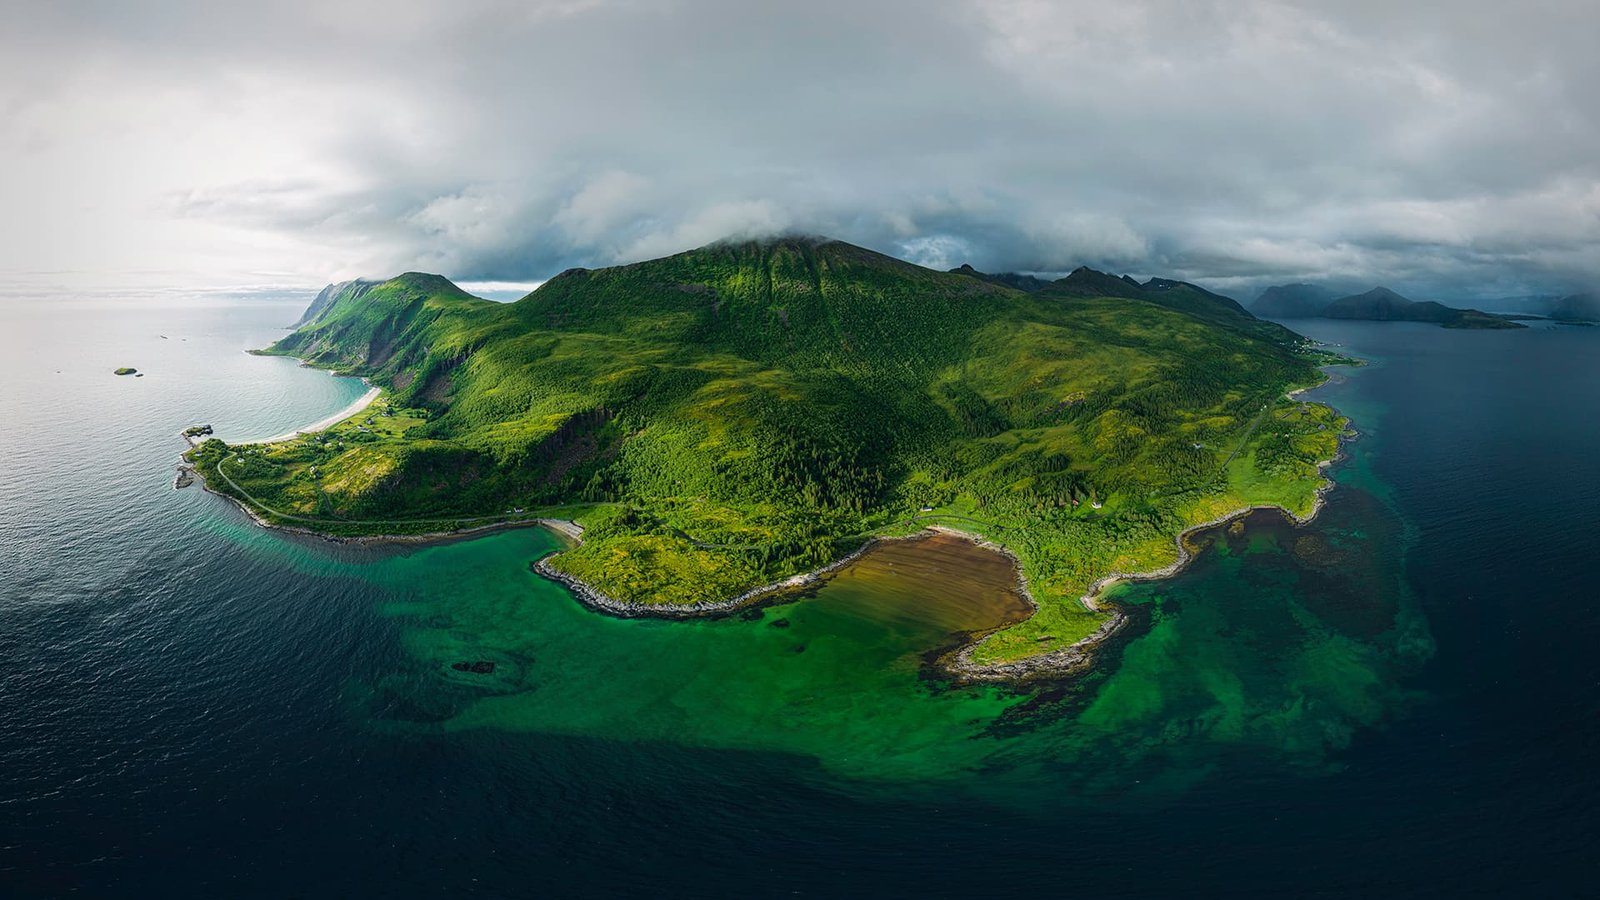 360-degree preview image of a green island of Senja in Norway